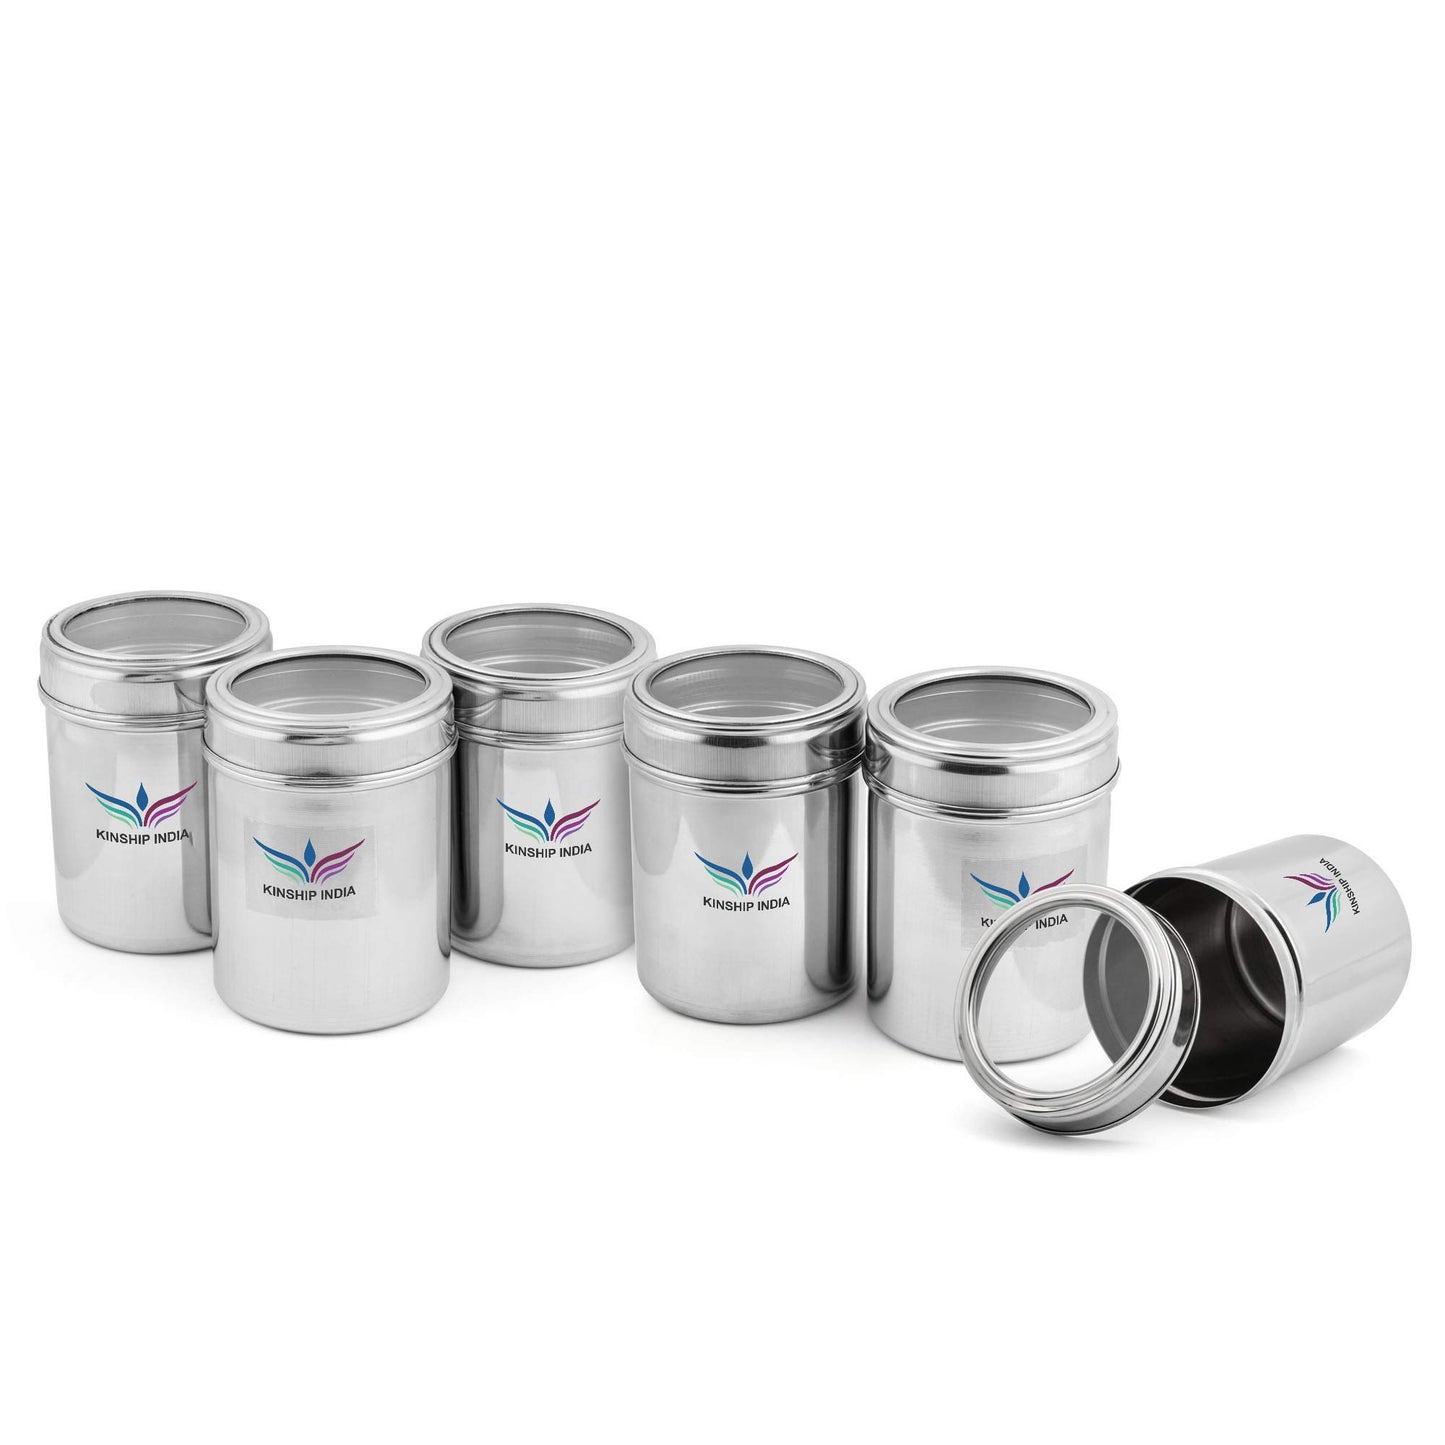 Stainless Steel See through Canister (700 ml) Each (Silver) - Set of 6